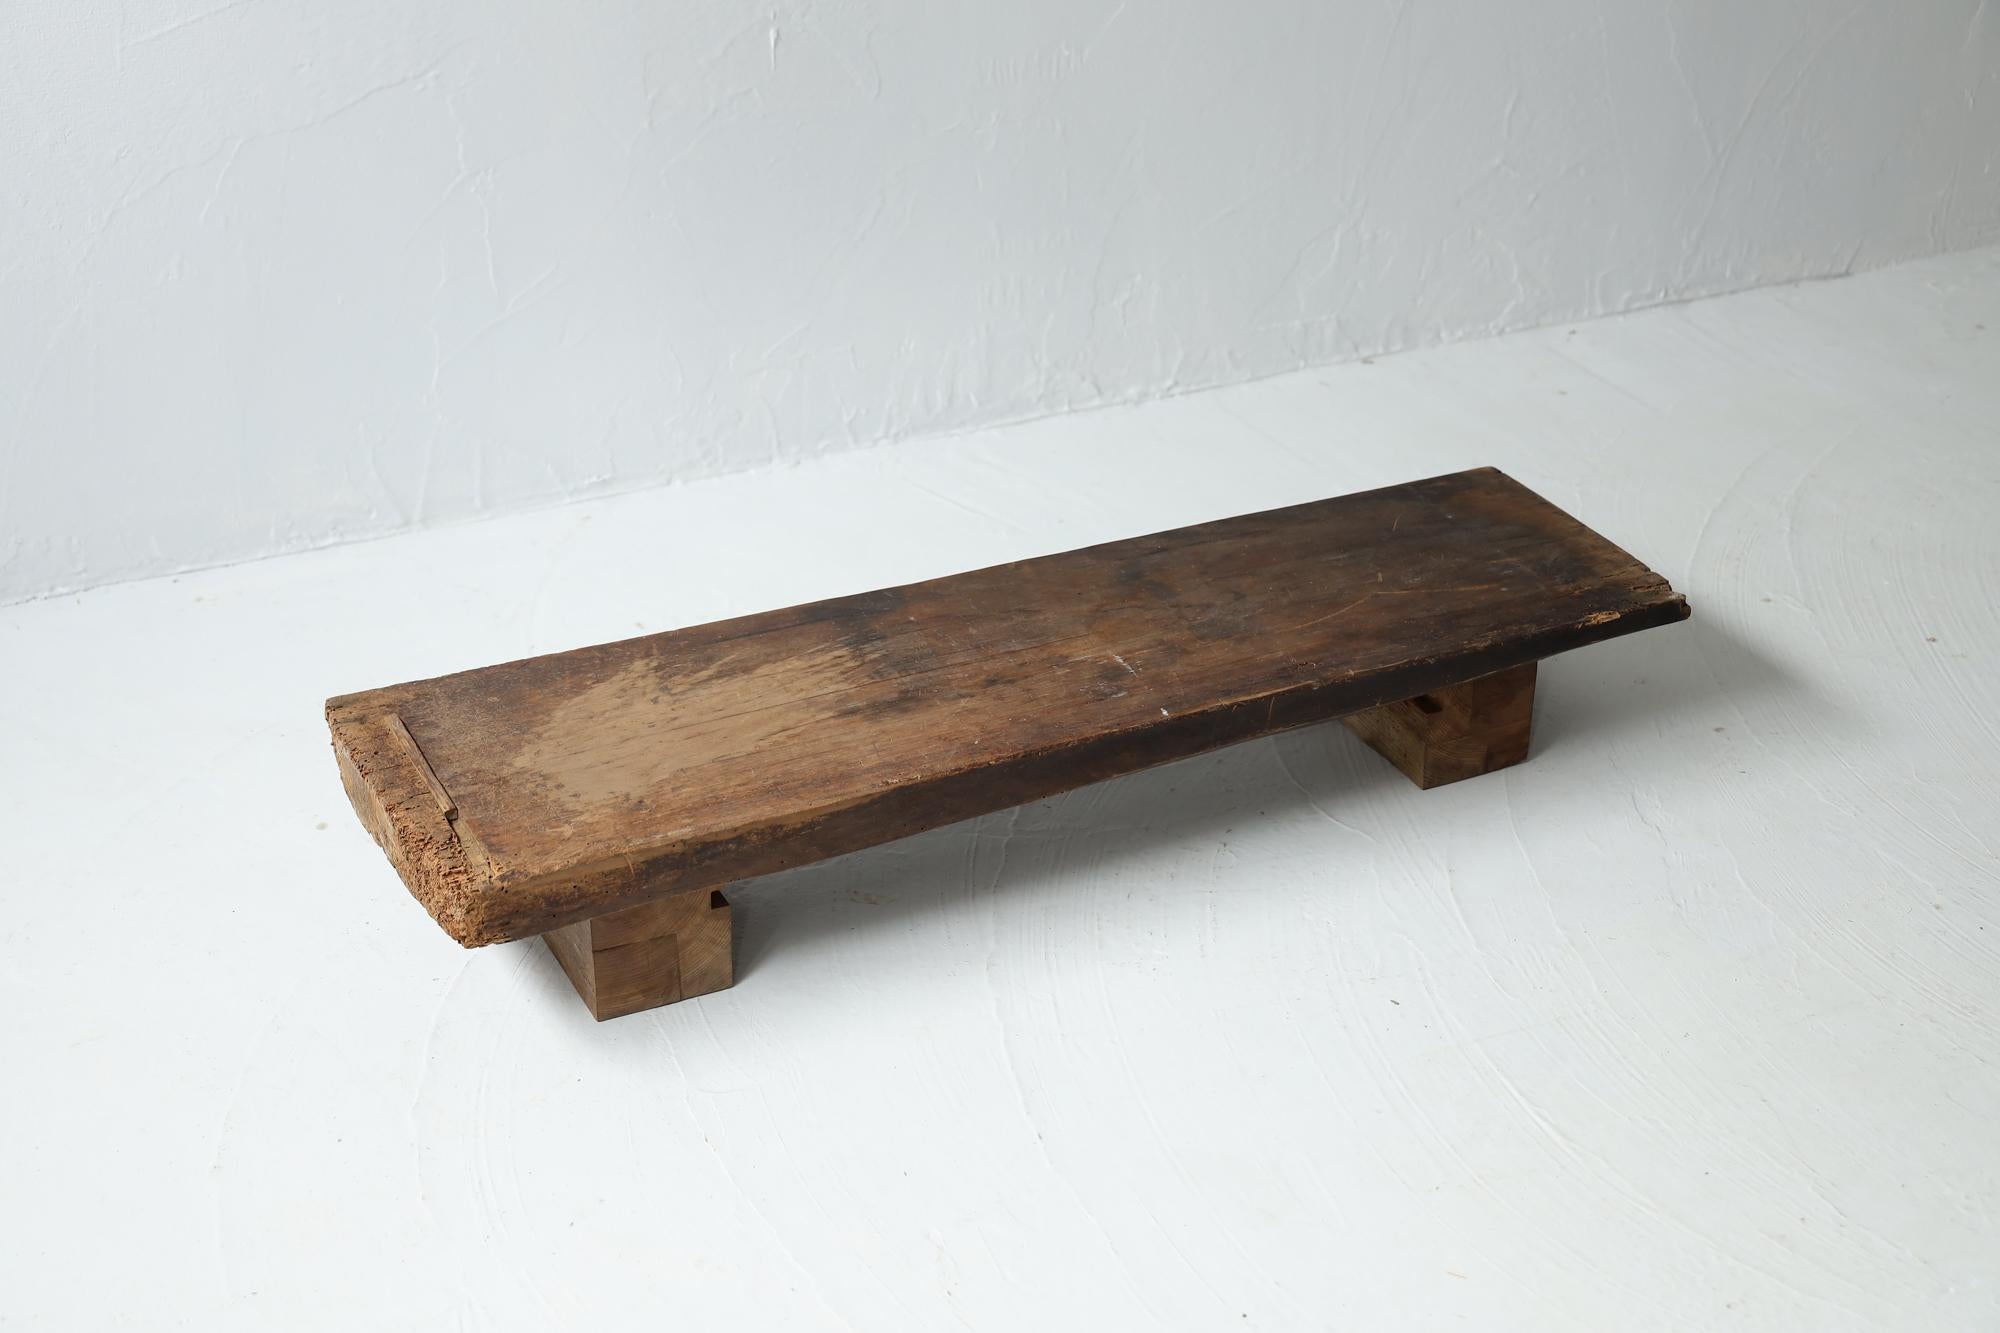 Hand-Carved Wooden Low Table, Japanese Antique, Wabi-Sabi, Mingei For Sale